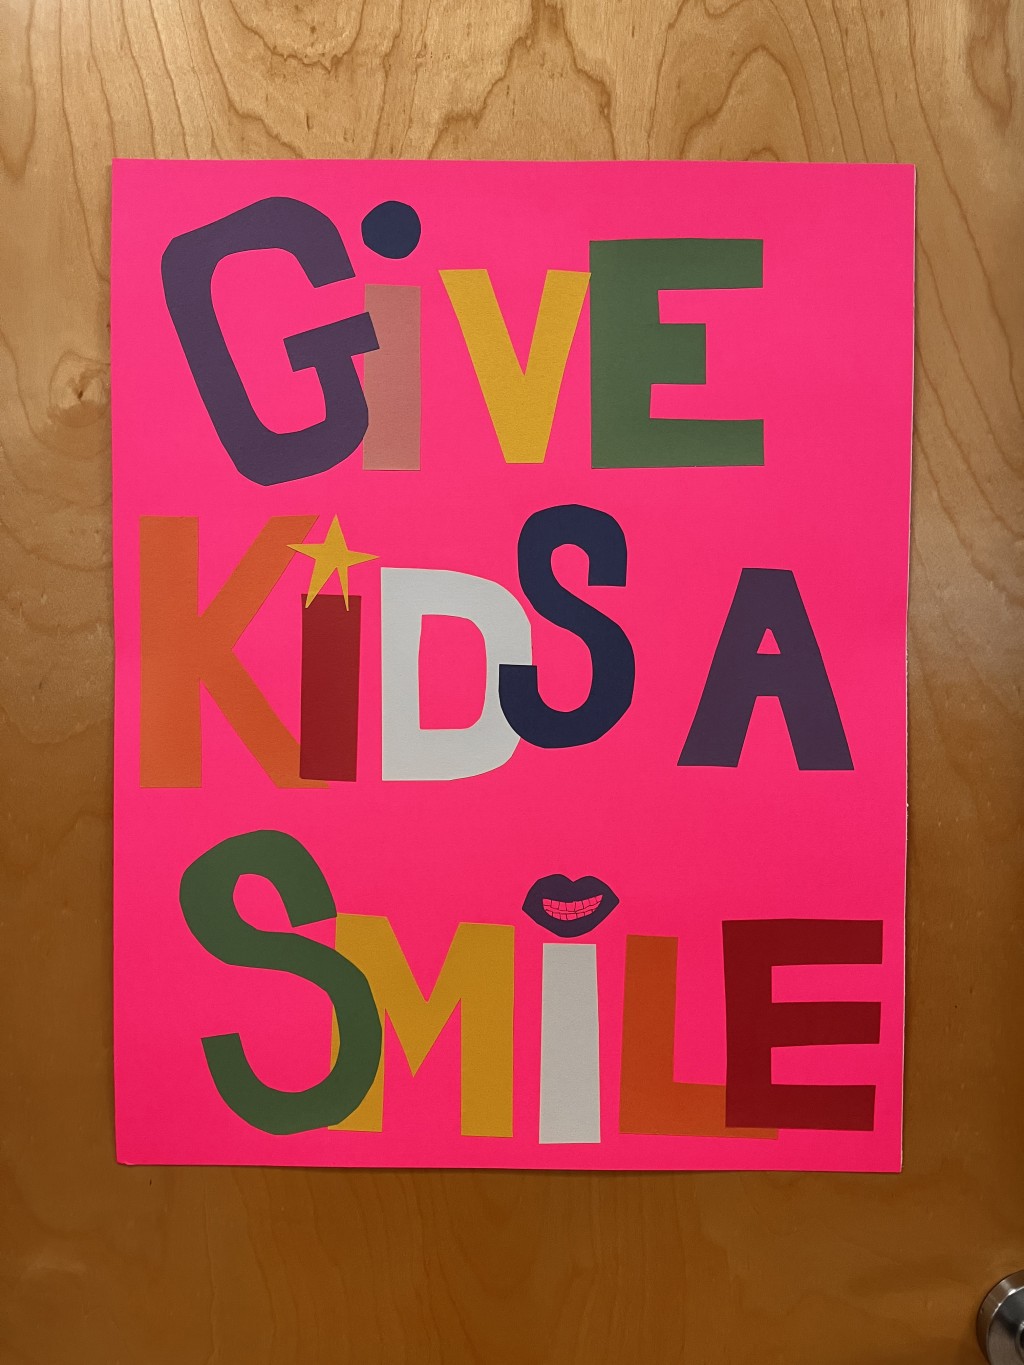 A pink poster against a wooden door reads "Give Kids a Smile"